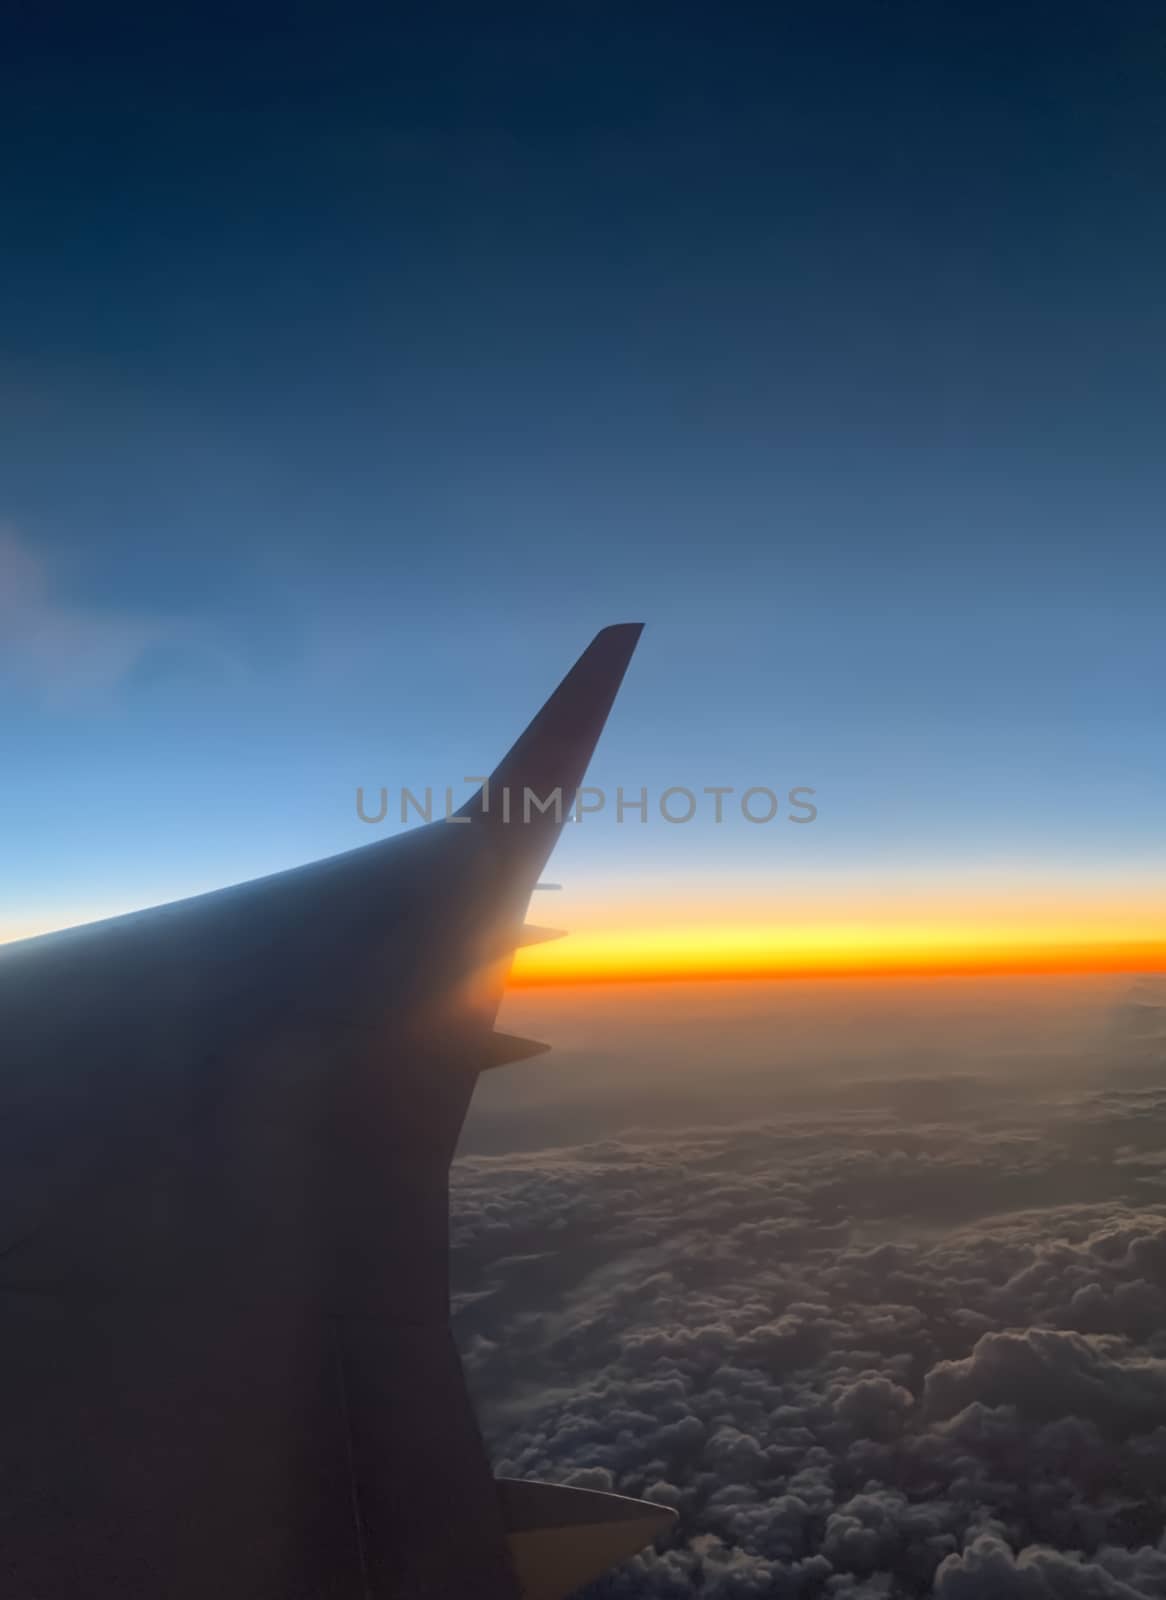 The atmosphere above the earth from 7 miles up. Looking out the window of a passenger plane, there is a sky that the atmosphere of the sun. Up in the morning.